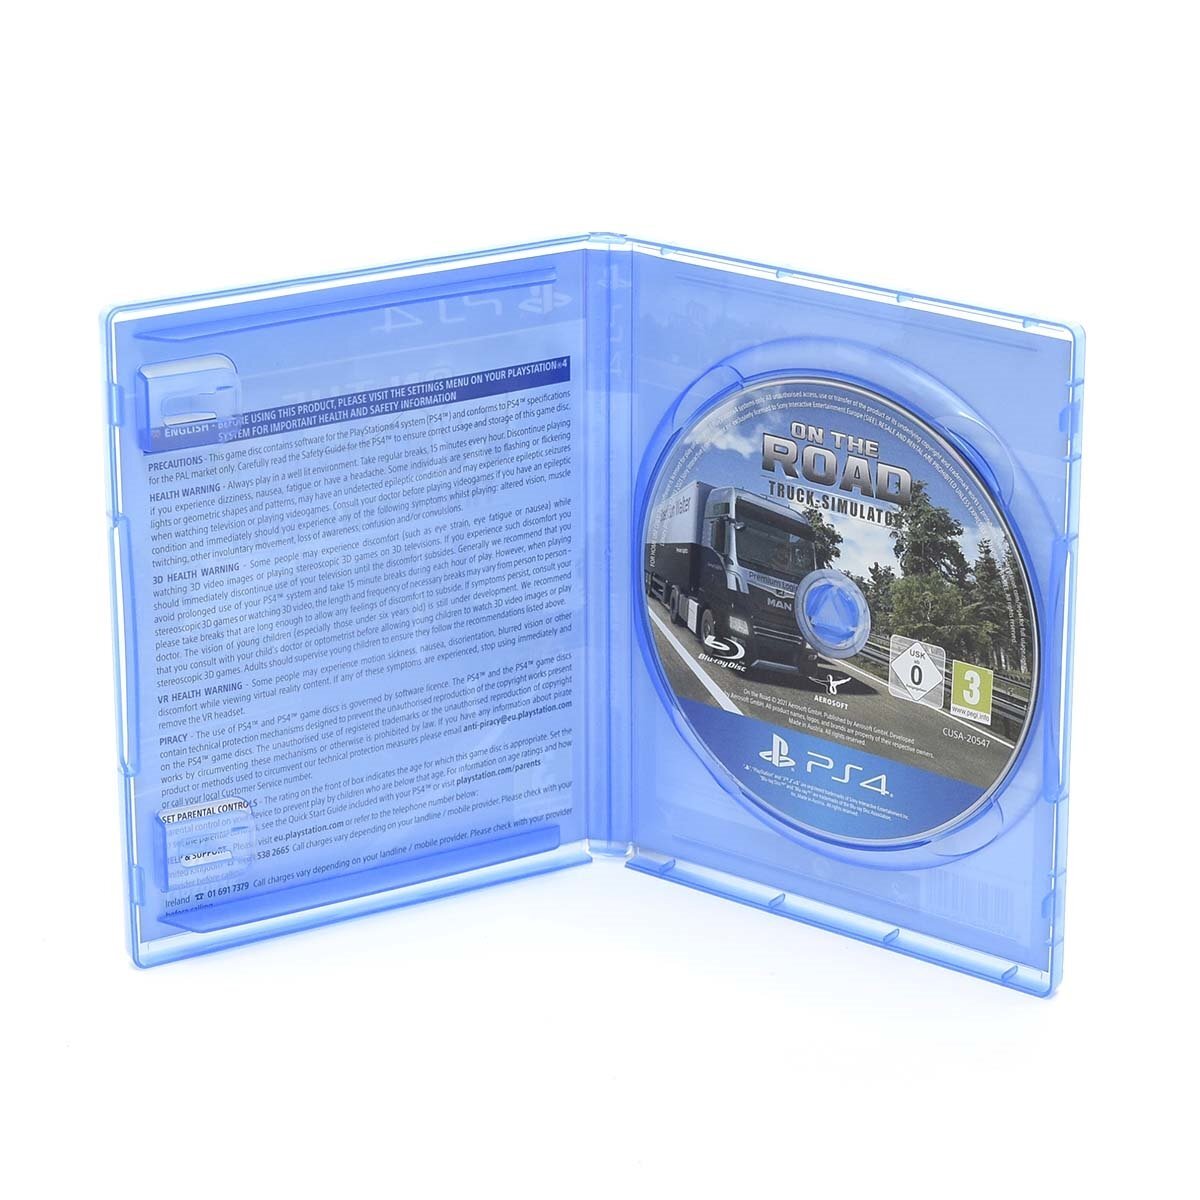 ▽512534 PlayStation4 ON THE ROAD TRUCK SIMULATOR PS4 プレイステーション4の画像3